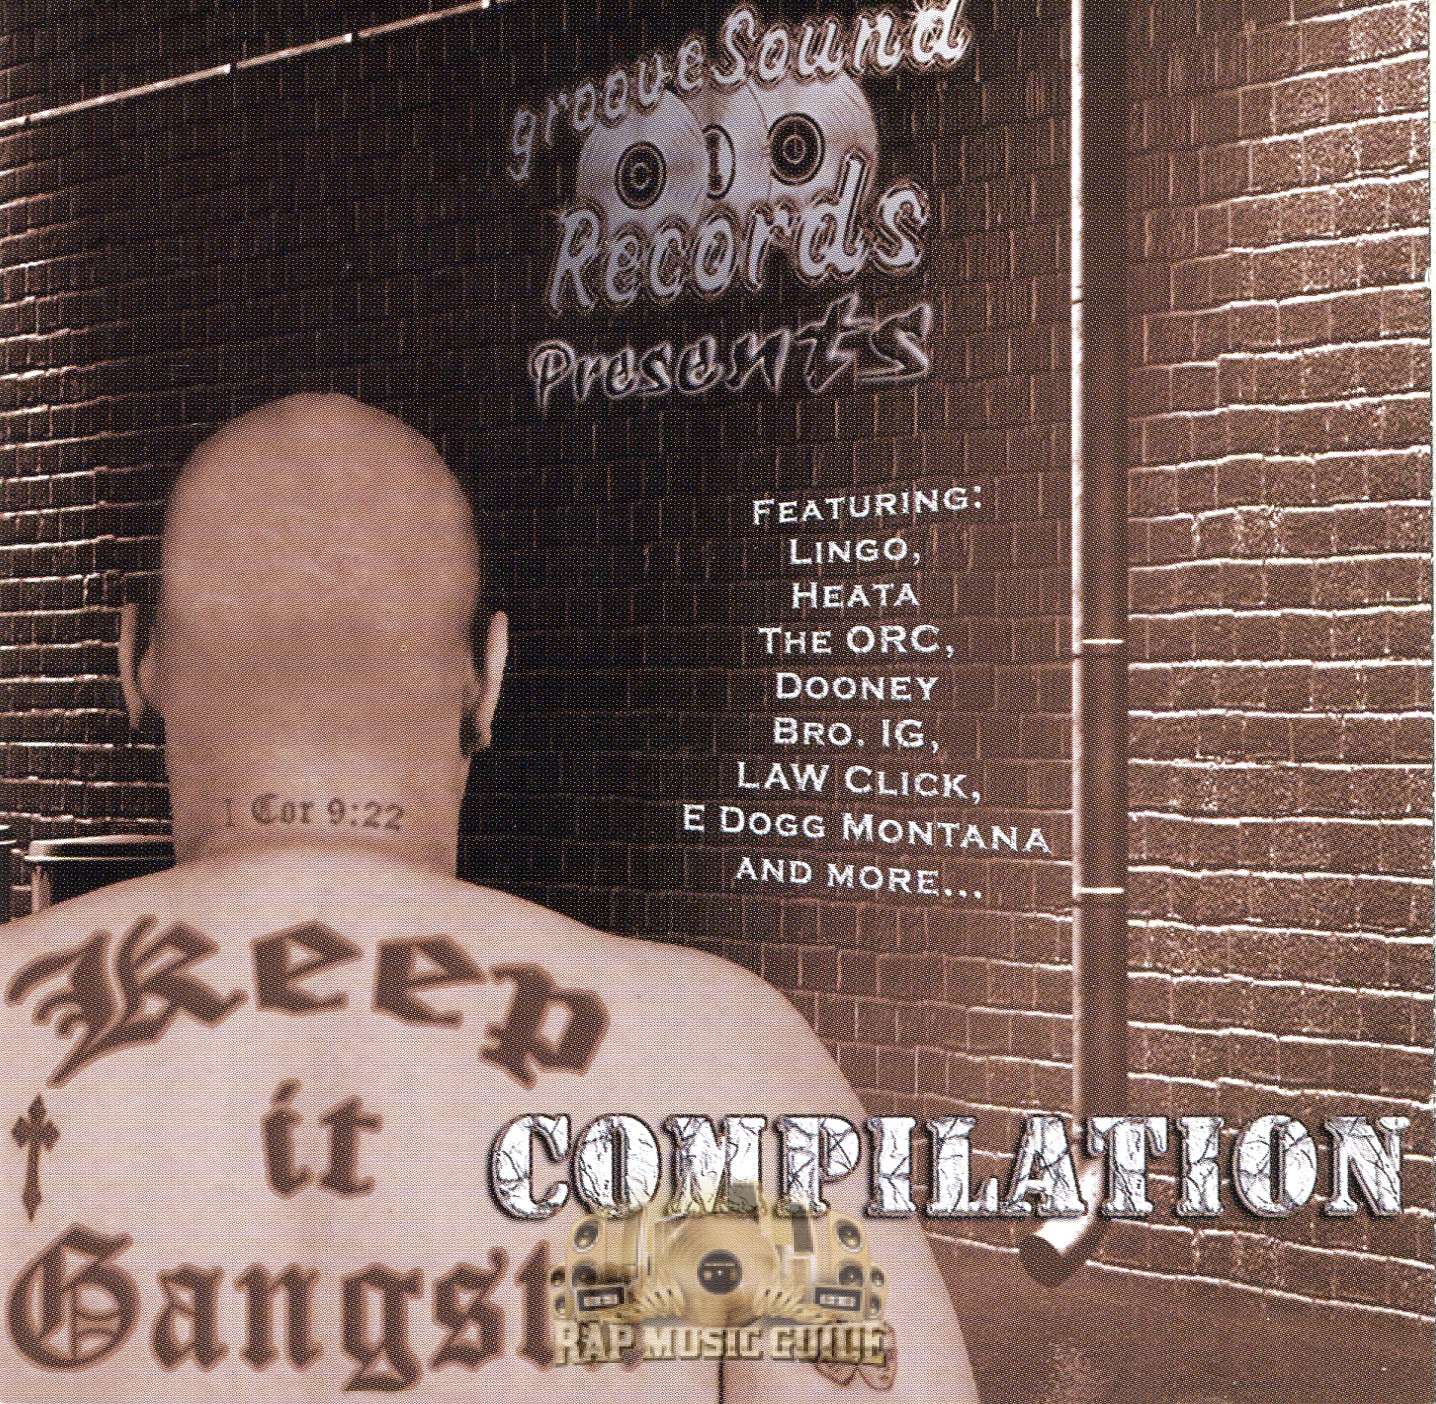 Groove Sound Records Presents - Keep It Gangsta Compilation: CD